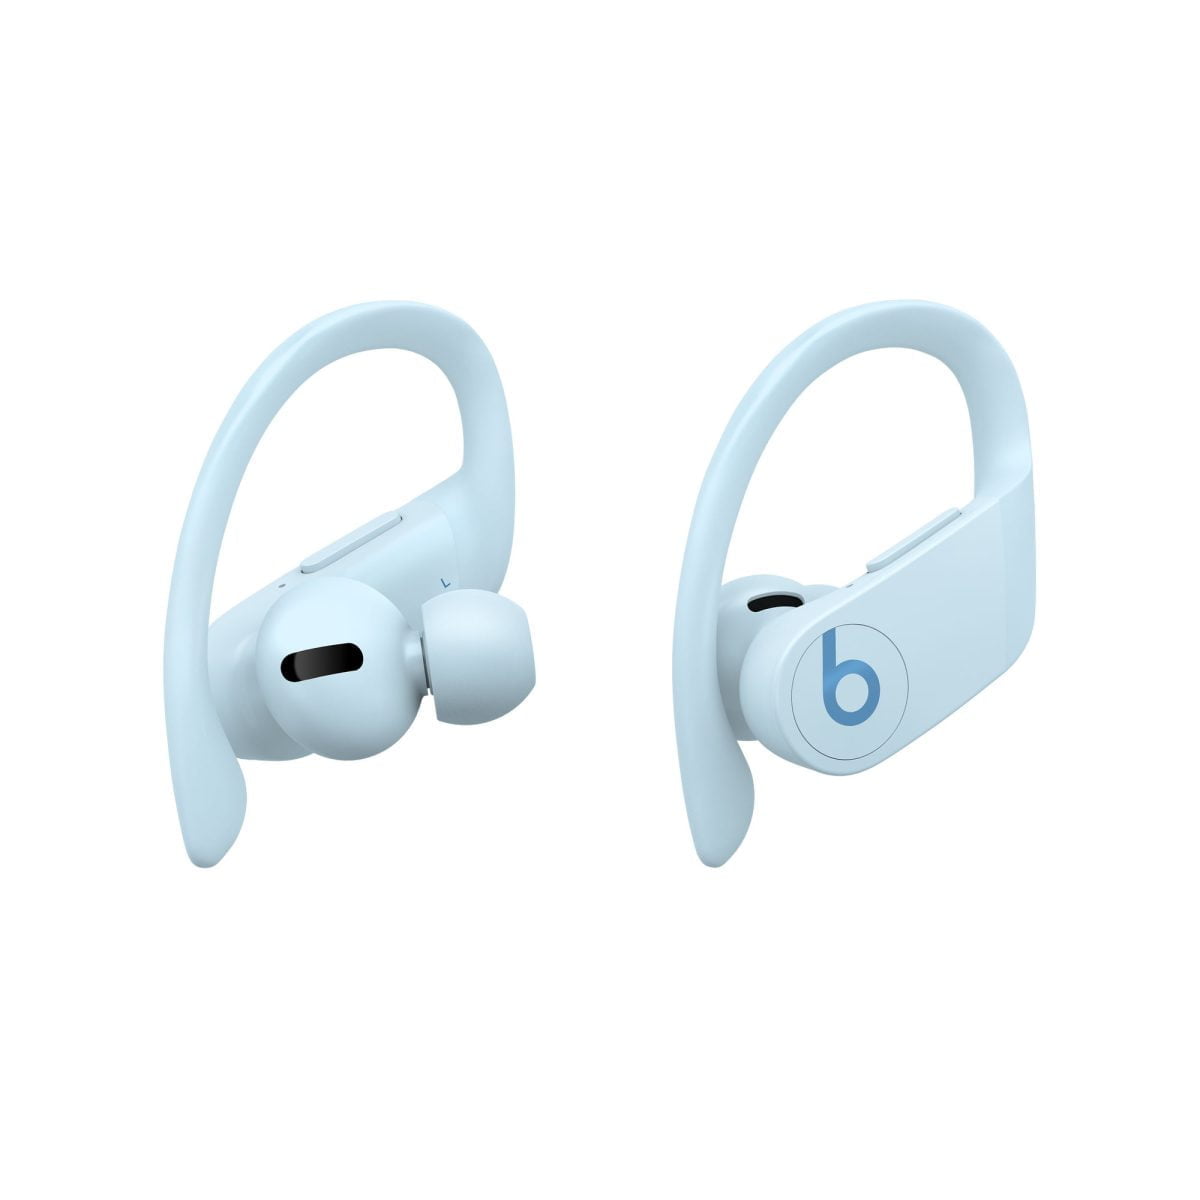 Mxy82 Av1 Apple &Lt;H1&Gt;&Lt;Span Class=&Quot;Pdp-Lrg-Header Rte-Plg-El&Quot;&Gt;Powerbeats Pro&Lt;/Span&Gt;&Lt;/H1&Gt; Totally Wireless Powerbeats Pro Earphones Are Built To Keep You Moving [Video Width=&Quot;1280&Quot; Height=&Quot;720&Quot; M4V=&Quot;Https://Lablaab.com/Wp-Content/Uploads/2020/10/Powerbeats-Pro-Totally-Wireless-Earphones-Black-Education-Apple-Ca.m4V&Quot;][/Video] &Lt;H2&Gt;&Lt;Span Style=&Quot;Color: #1B1919; Font-Size: 24Px;&Quot;&Gt;Made For Movement&Lt;/Span&Gt;&Lt;/H2&Gt; &Lt;Div&Gt; &Lt;Span Class=&Quot;Pdp-Lrg-Body Rte-Plg-El&Quot;&Gt;Adjustable, Secure-Fit Earhooks Stay In Place With Multiple Eartip Options, And Are Made To Move With You, No Matter Where You Go.&Lt;/Span&Gt; &Lt;/Div&Gt; &Lt;Div&Gt; &Lt;H2&Gt;&Lt;Span Class=&Quot;Pdp-Lrg-Body Rte-Plg-El&Quot;&Gt;Sweat &Amp; Water-Resistant&Lt;/Span&Gt;&Lt;/H2&Gt; &Lt;Span Class=&Quot;Pdp-Lrg-Body Rte-Plg-El&Quot;&Gt;Reinforced Design For Sweat And Water Resistance Help You Make It Through Whatever Your Day Brings.&Lt;/Span&Gt; &Lt;/Div&Gt; &Lt;Div&Gt; &Lt;H2&Gt;&Lt;Span Class=&Quot;Pdp-Lrg-Body Rte-Plg-El&Quot;&Gt;Up To 9 Hours Of Listening Time&Lt;/Span&Gt;&Lt;/H2&Gt; &Lt;Span Class=&Quot;Pdp-Lrg-Body Rte-Plg-El&Quot;&Gt;Get More Than 24 Hours Of Combined Playback With The Charging Case, And Use 5-Minute Fast Fuel For 1.5 Hours Of Playback When Battery Is Low&Lt;Sup&Gt;1&Lt;/Sup&Gt;.&Lt;/Span&Gt; &Lt;/Div&Gt; &Lt;Div&Gt; &Lt;H2&Gt;&Lt;Span Class=&Quot;Pdp-Lrg-Body Rte-Plg-El&Quot;&Gt;Play One Side Or Both&Lt;/Span&Gt;&Lt;/H2&Gt; &Lt;Span Class=&Quot;Pdp-Lrg-Body Rte-Plg-El&Quot;&Gt;Auto Play/Pause, Independent Earbud Connection Via The Apple H1 Chip, And Full Volume And Track Controls On Each Earbud Mean You’re In Charge Of How You Listen.&Lt;/Span&Gt; &Lt;/Div&Gt; &Lt;H3 Class=&Quot;Pdp-Detail-Title Pdp-Lrg-Body-B&Quot;&Gt;In The Box&Lt;/H3&Gt; &Lt;Div&Gt; &Lt;Ul Class=&Quot;Pdp-Lrg-Body&Quot;&Gt; &Lt;Li&Gt;Powerbeats Pro Totally Wireless Earphones&Lt;/Li&Gt; &Lt;Li&Gt;Charging Case&Lt;/Li&Gt; &Lt;Li&Gt;Eartips With Four Size Options&Lt;/Li&Gt; &Lt;Li&Gt;Lightning To Usb-A Charging Cable&Lt;/Li&Gt; &Lt;Li&Gt;Quick Start Guide&Lt;/Li&Gt; &Lt;Li&Gt;Warranty Card (One Year Manufacturer Warranty)&Lt;/Li&Gt; &Lt;/Ul&Gt; &Lt;/Div&Gt; Powerbeats Pro In-Ear Wireless Headphones Beats Powerbeats Pro In-Ear Wireless Headphones Beats By Dr. Dre - Glacier Blue